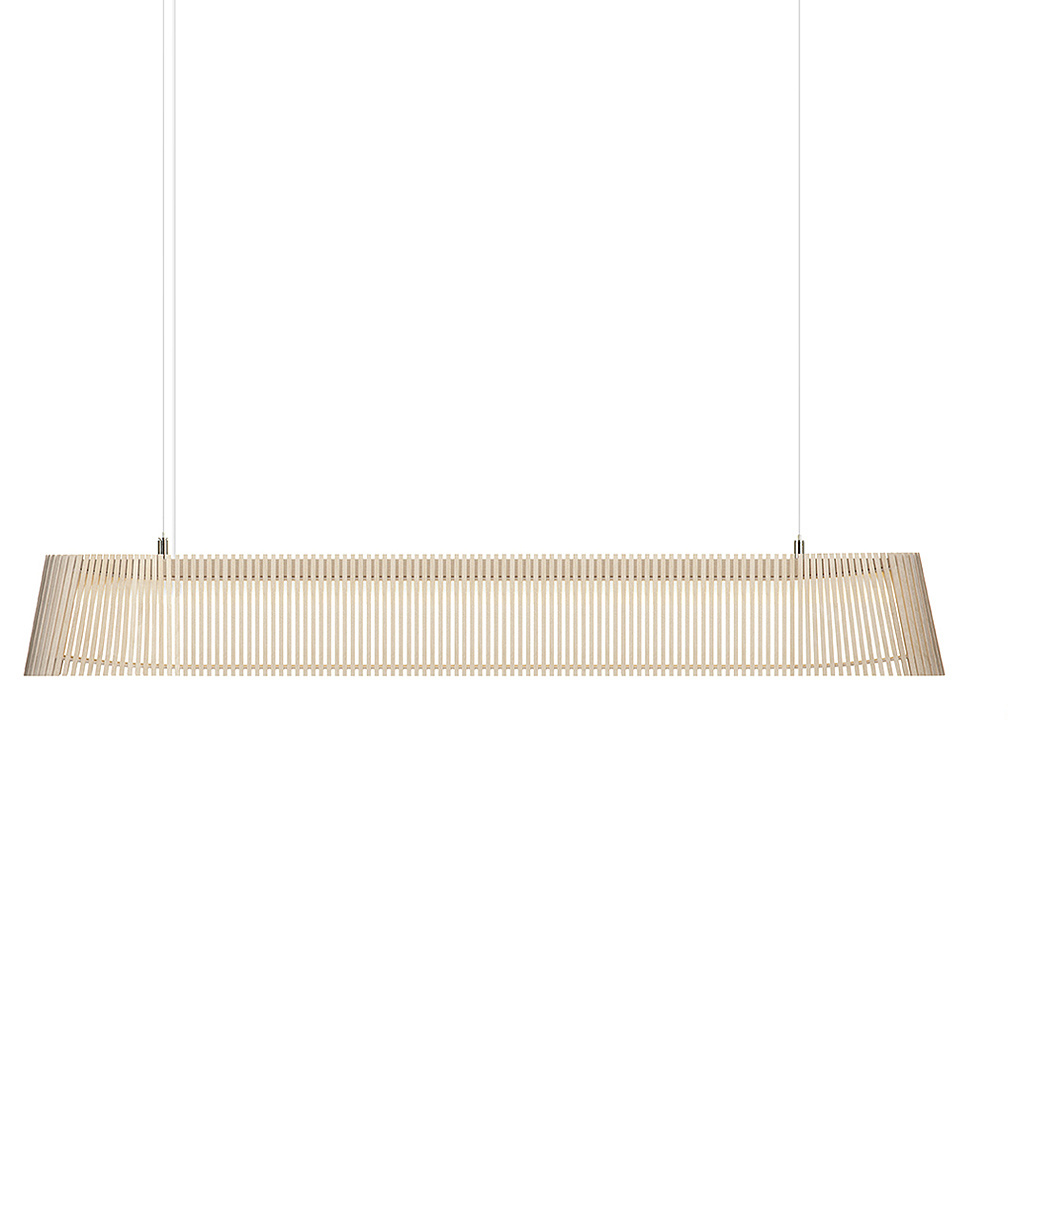 Owalo 7000 pendant is available in natural birch